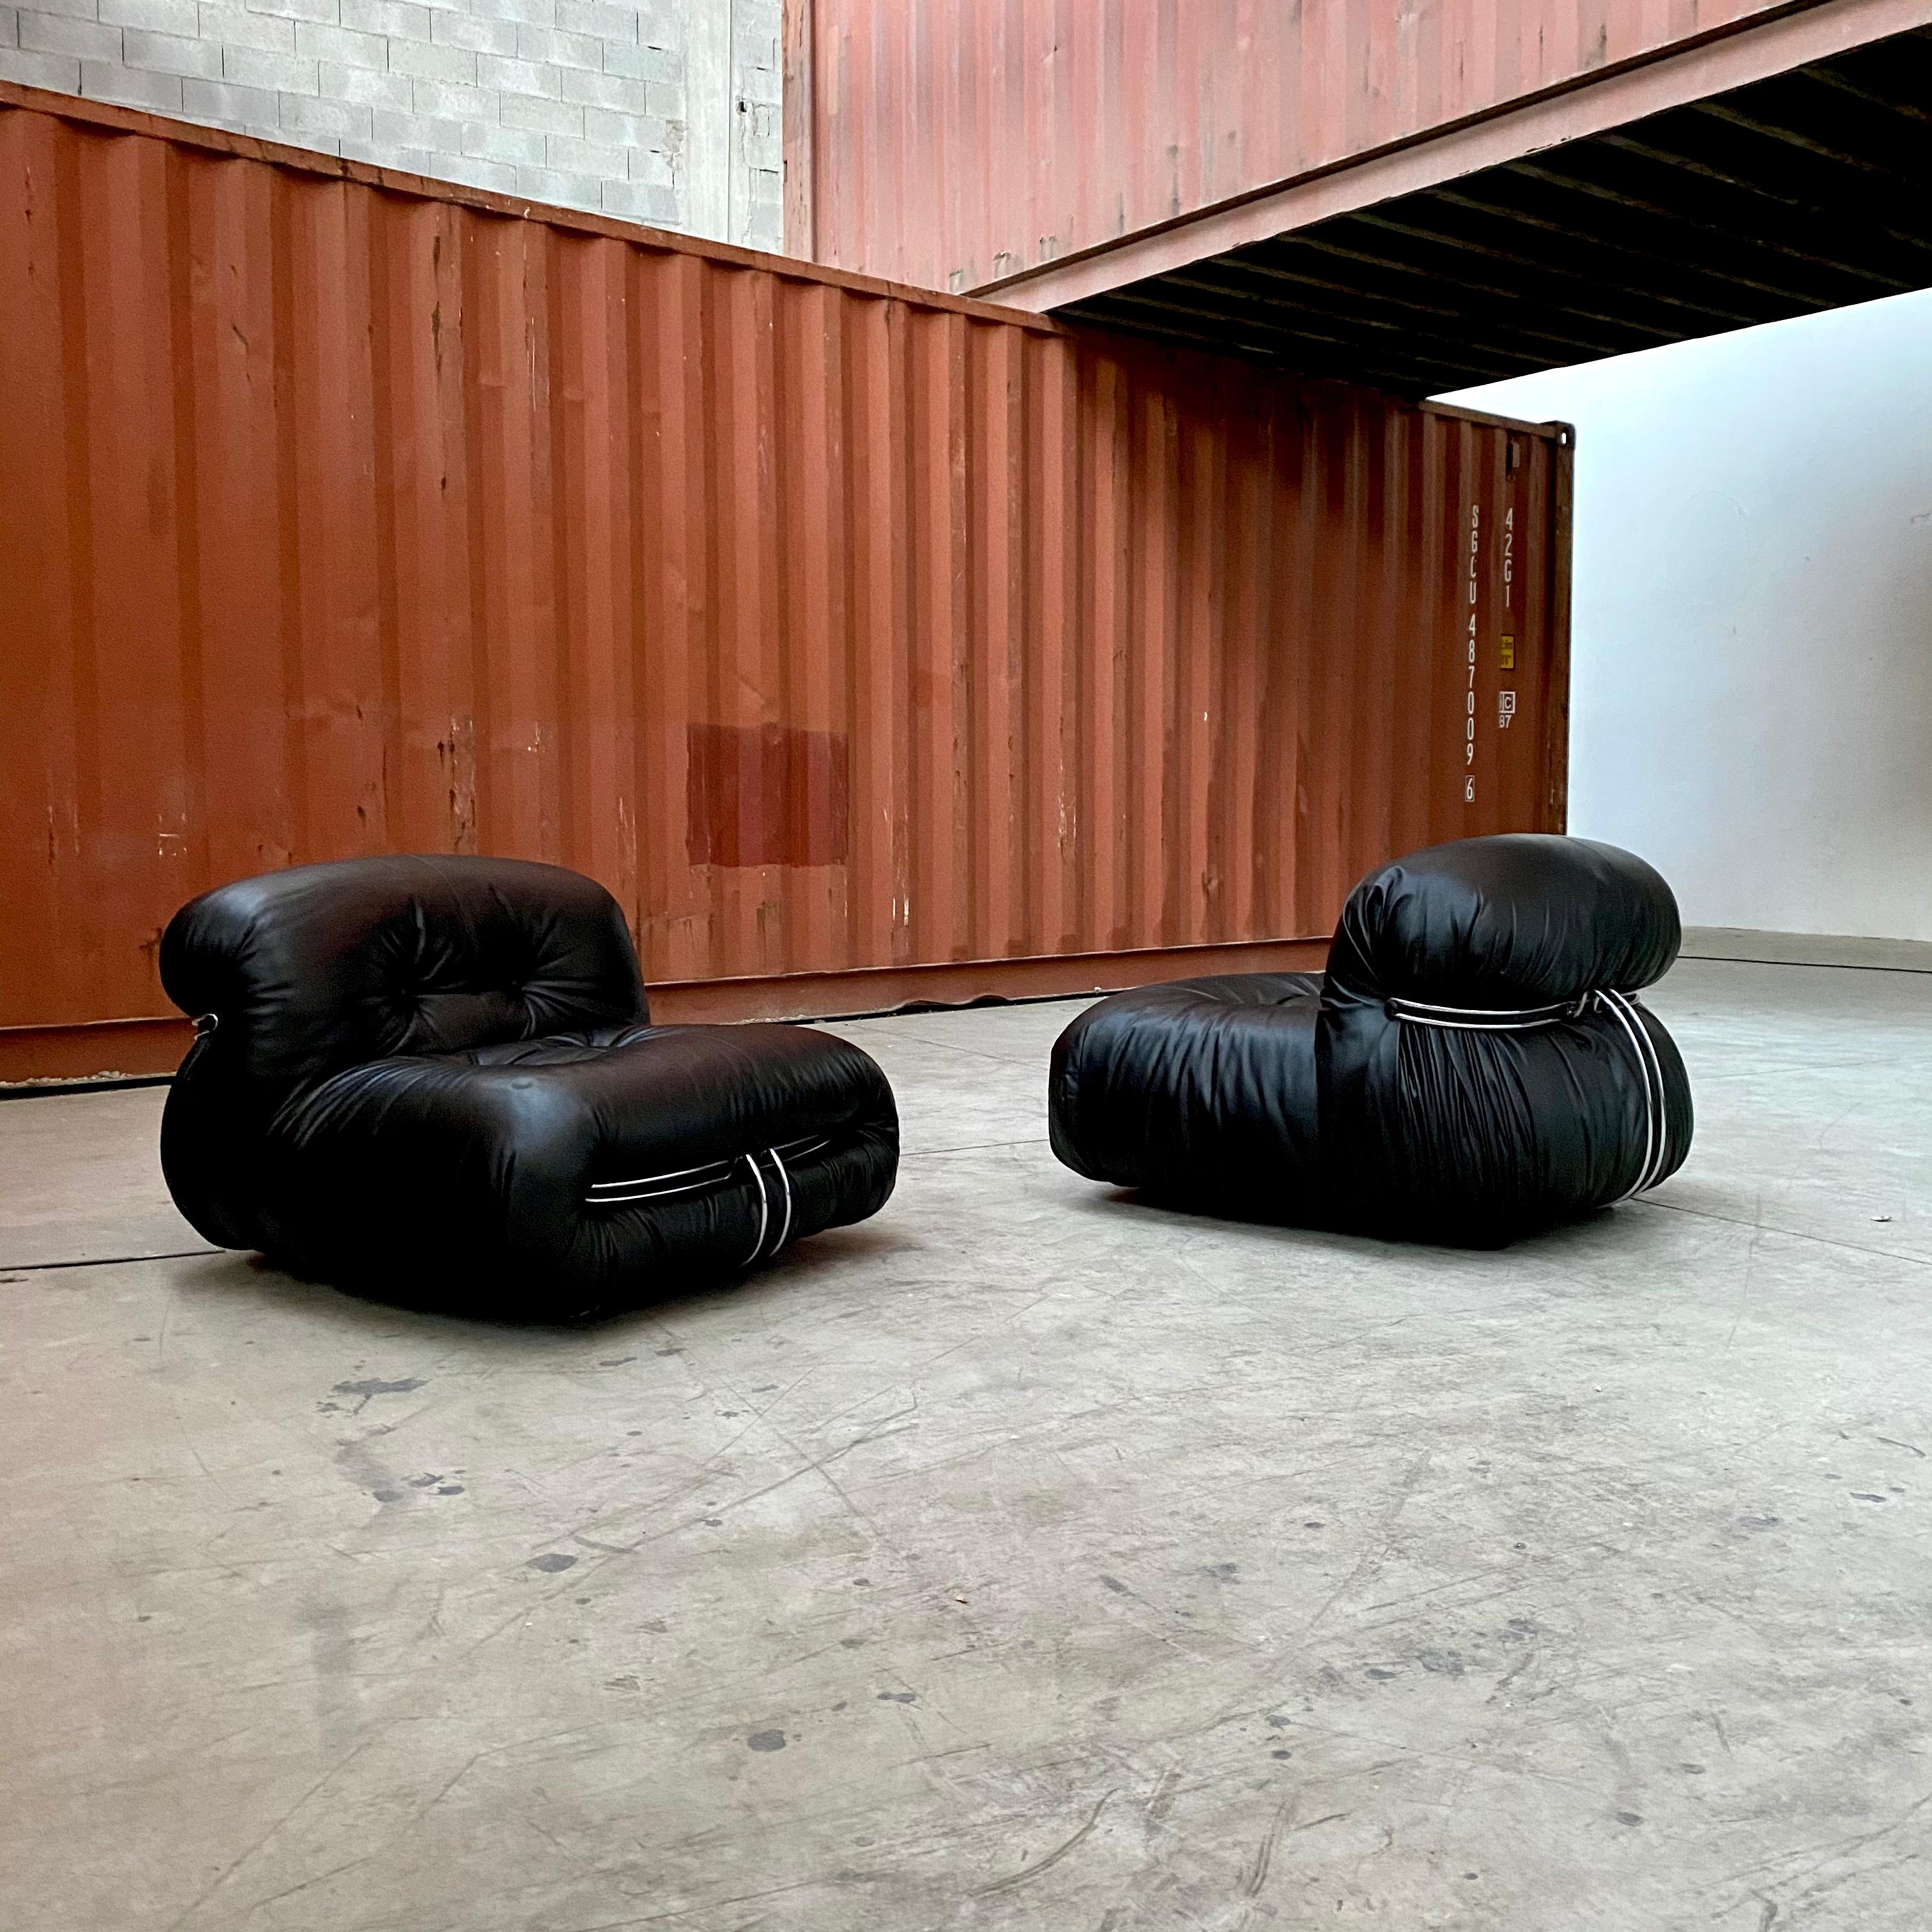 Leather Afra & Tobia Scarpa “Soriana” Lounge Chairs for Cassina, 1969